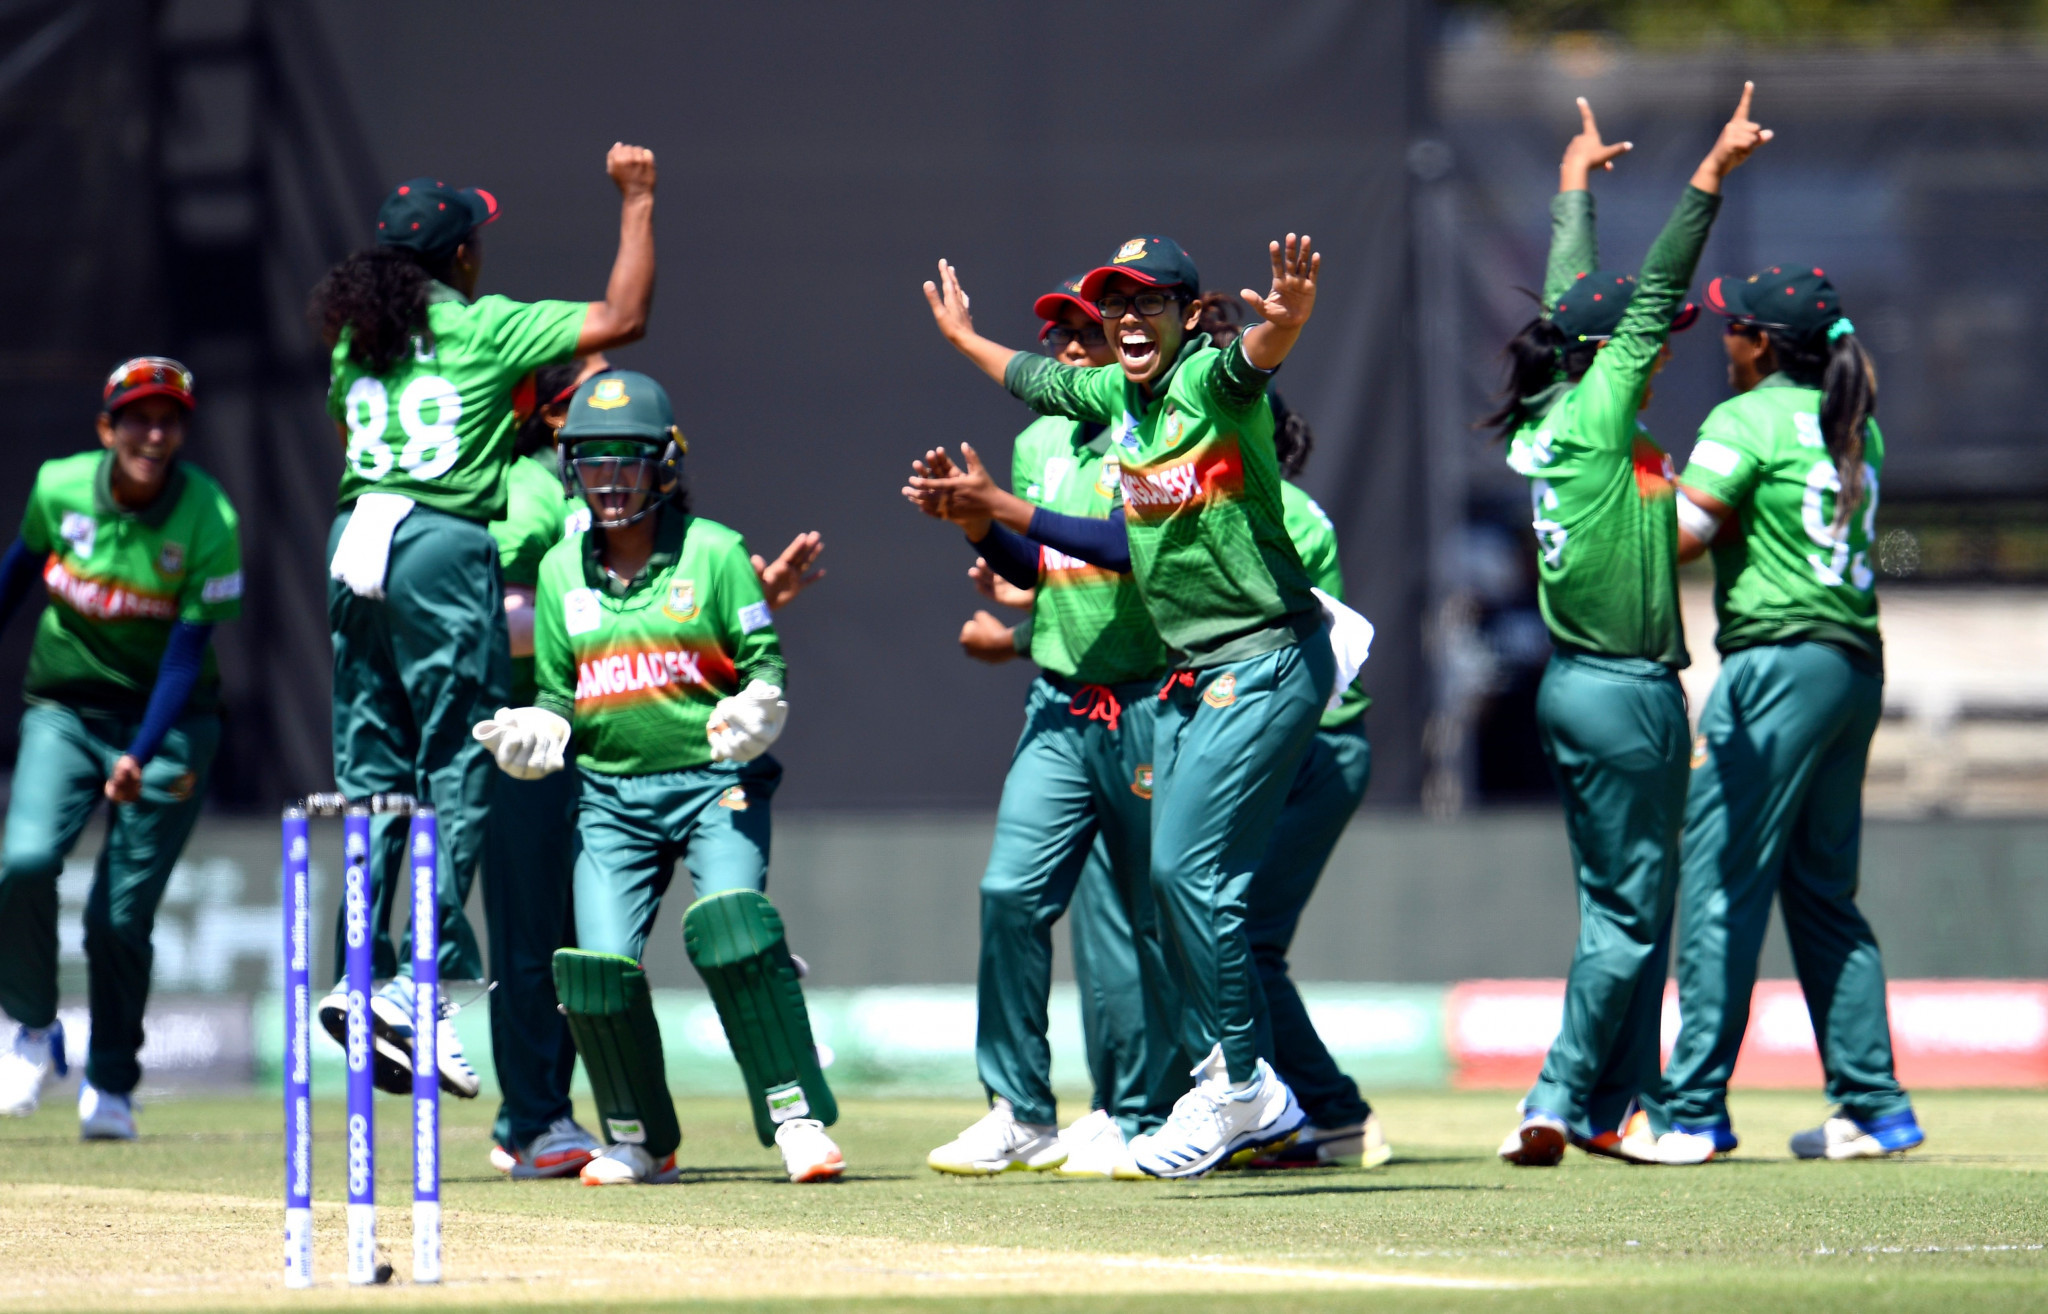 Bangladesh will be among the favourites to seal their place at the 2022 Commonwealth Games in Birmingham at the qualifying tournament in Kuala Lumpur ©Getty Images